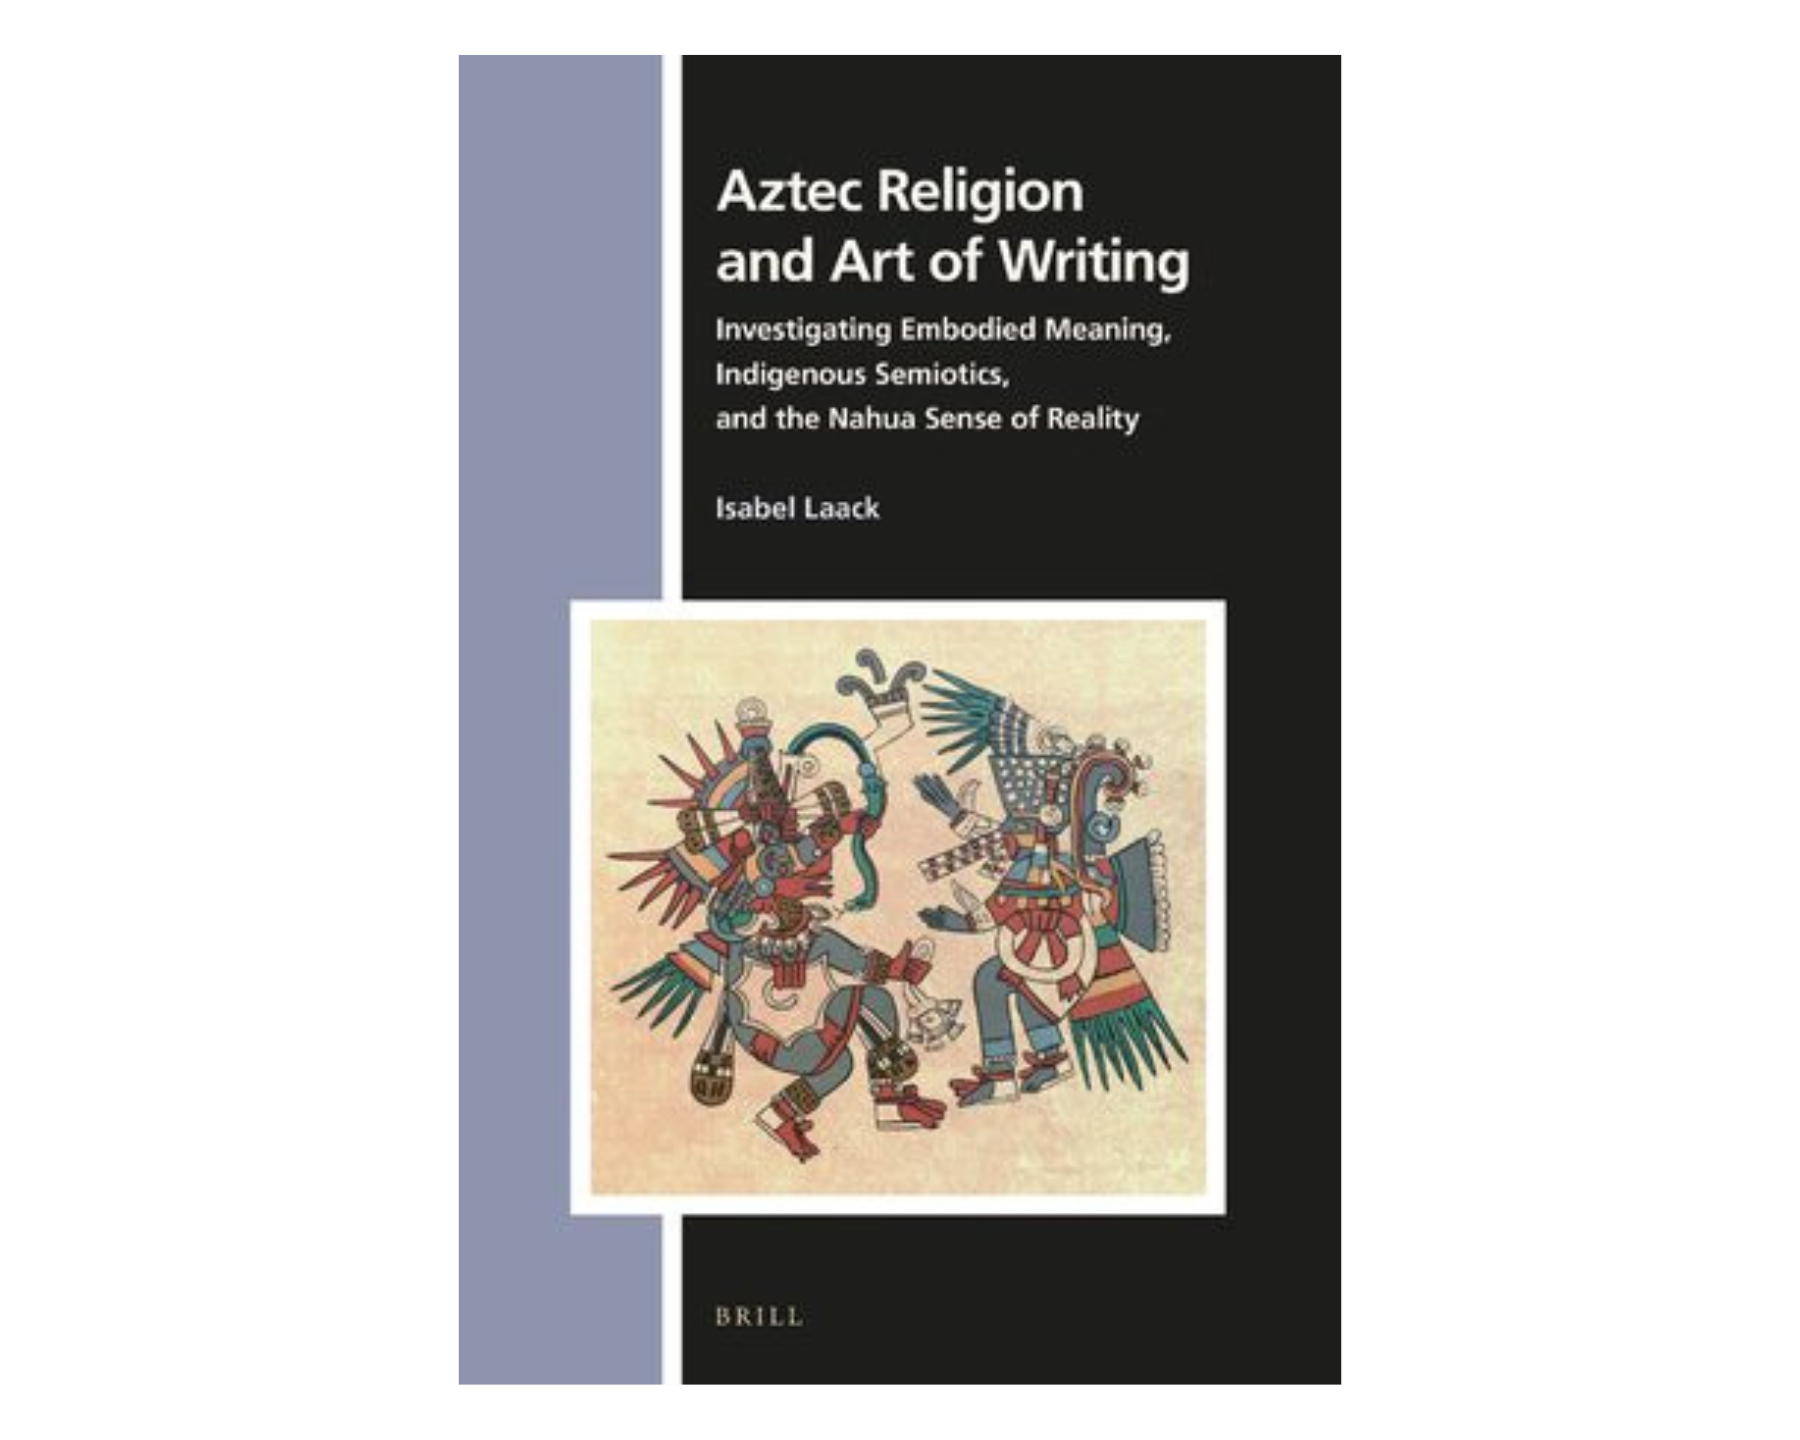 Cover: "Aztec Religion and Art of Writing"